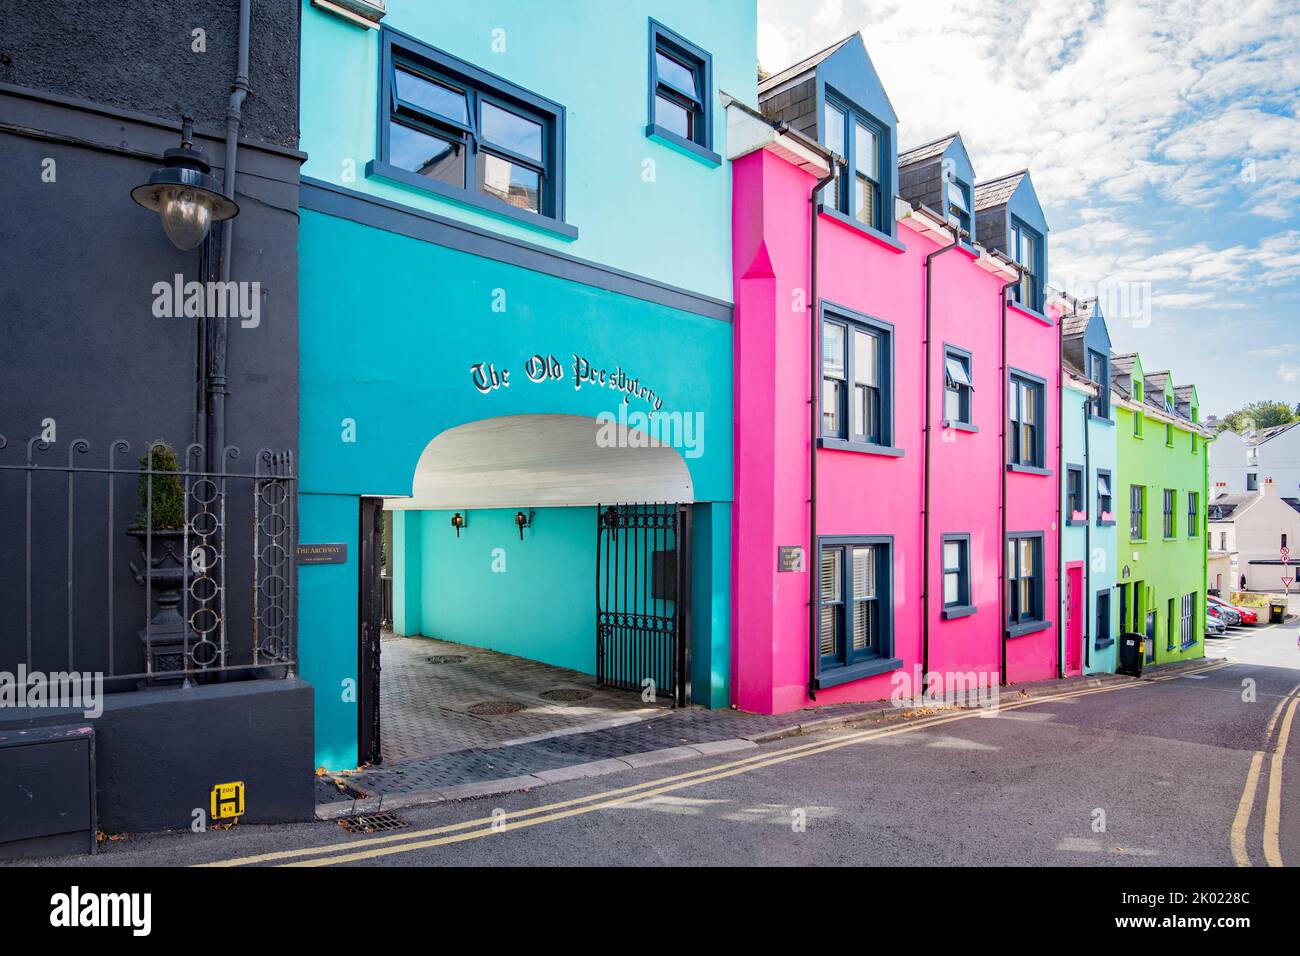 Brightly coloured  painted properties in Kinsale, a historic port & fishing town  approx 25 km south of Cork City on the southeast coast of Ireland. Stock Photo